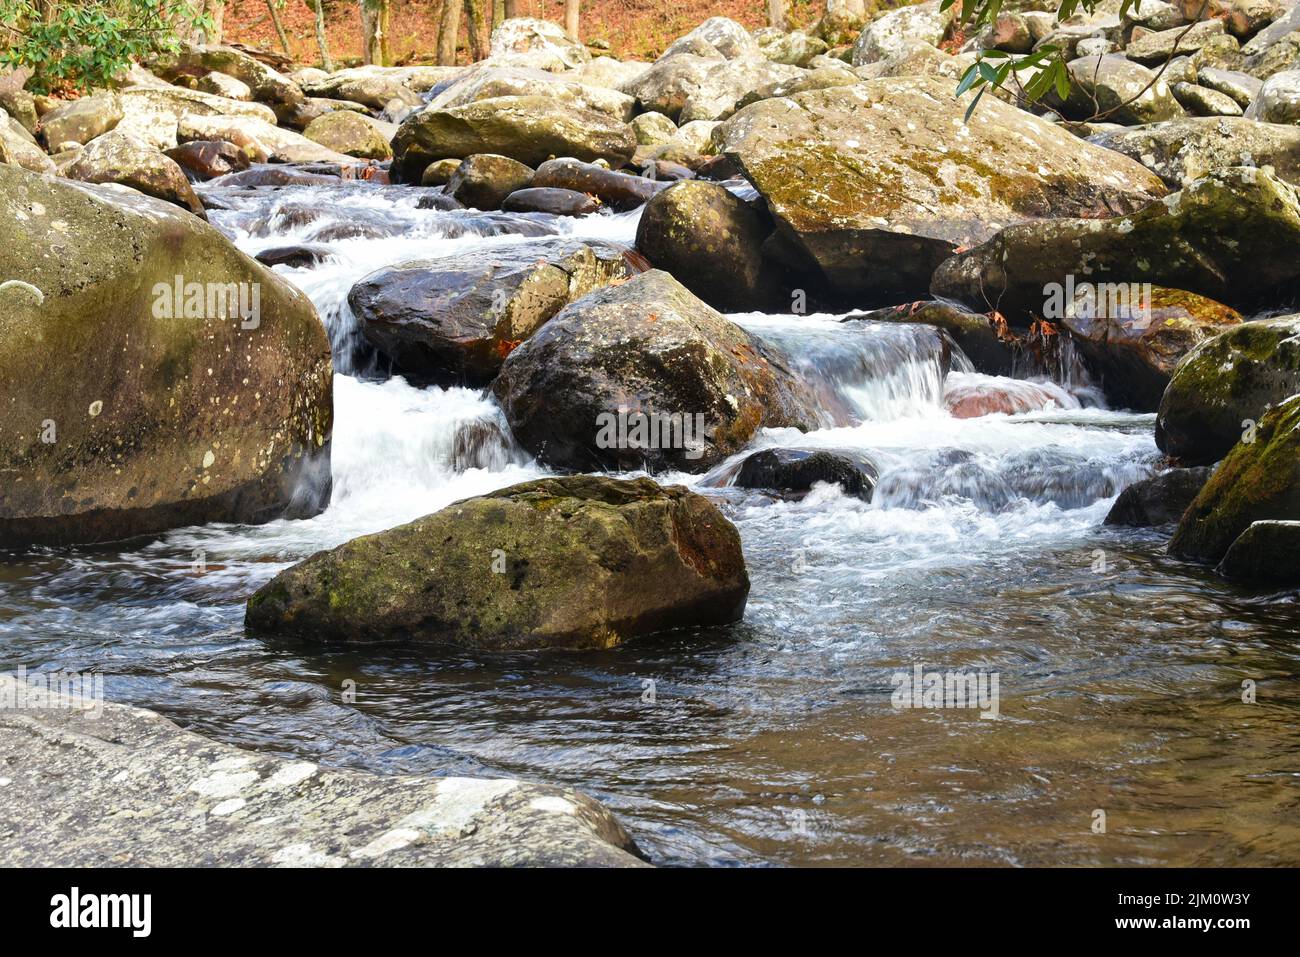 A beautiful view of rocks in a flowing river Stock Photo